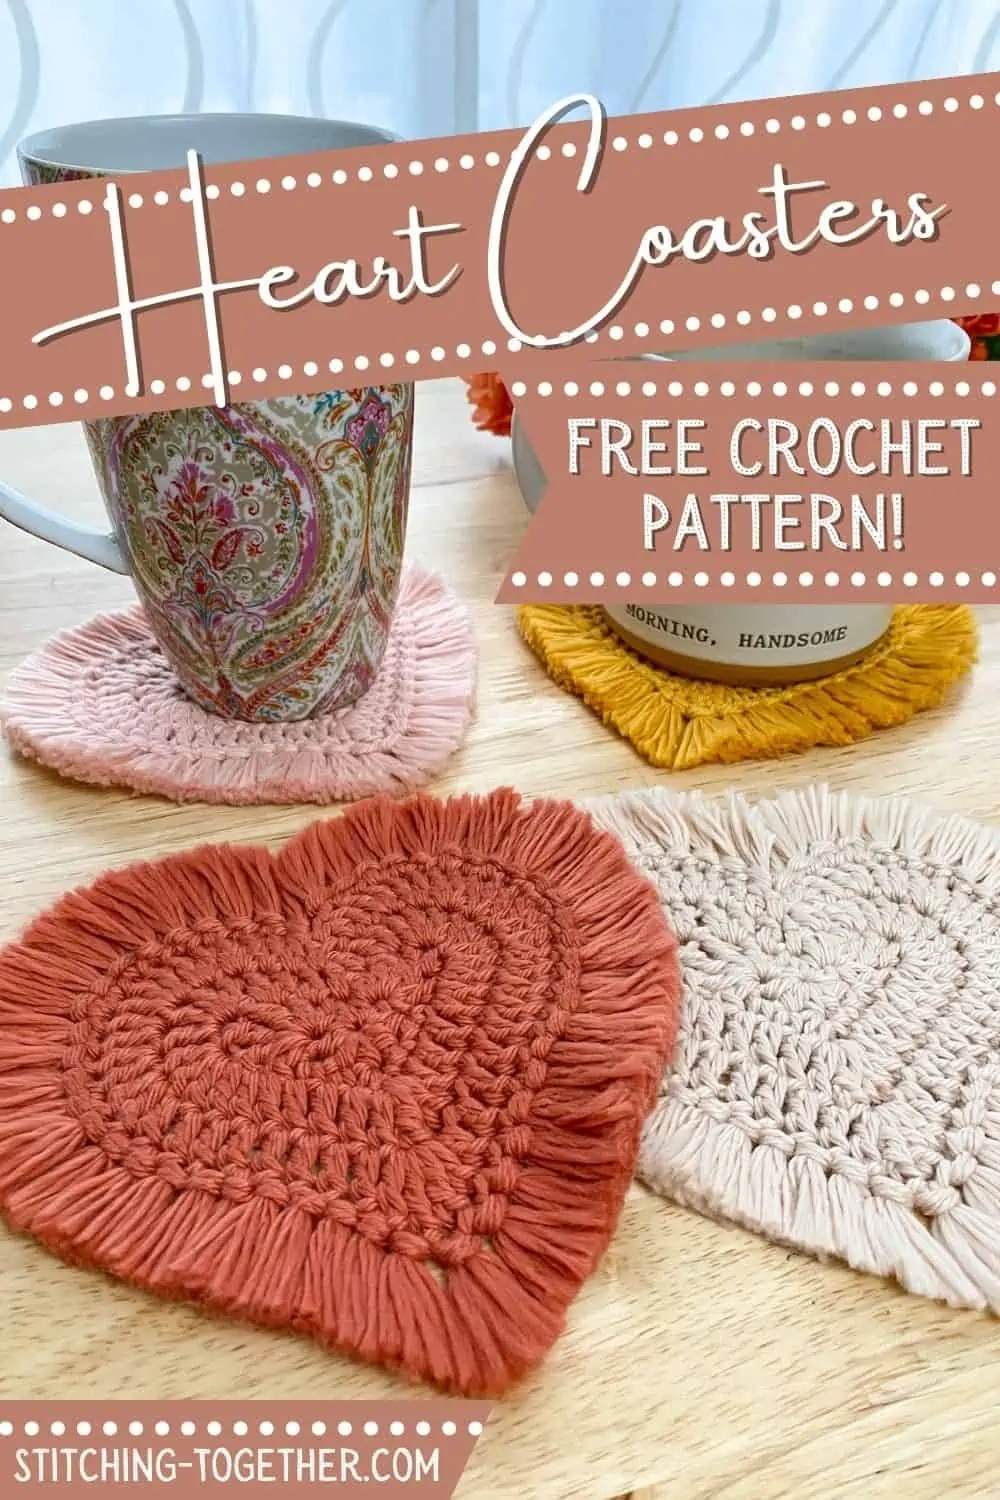 graphic reading, "heart coasters free crochet pattern" with heart crochet coasters and mugs